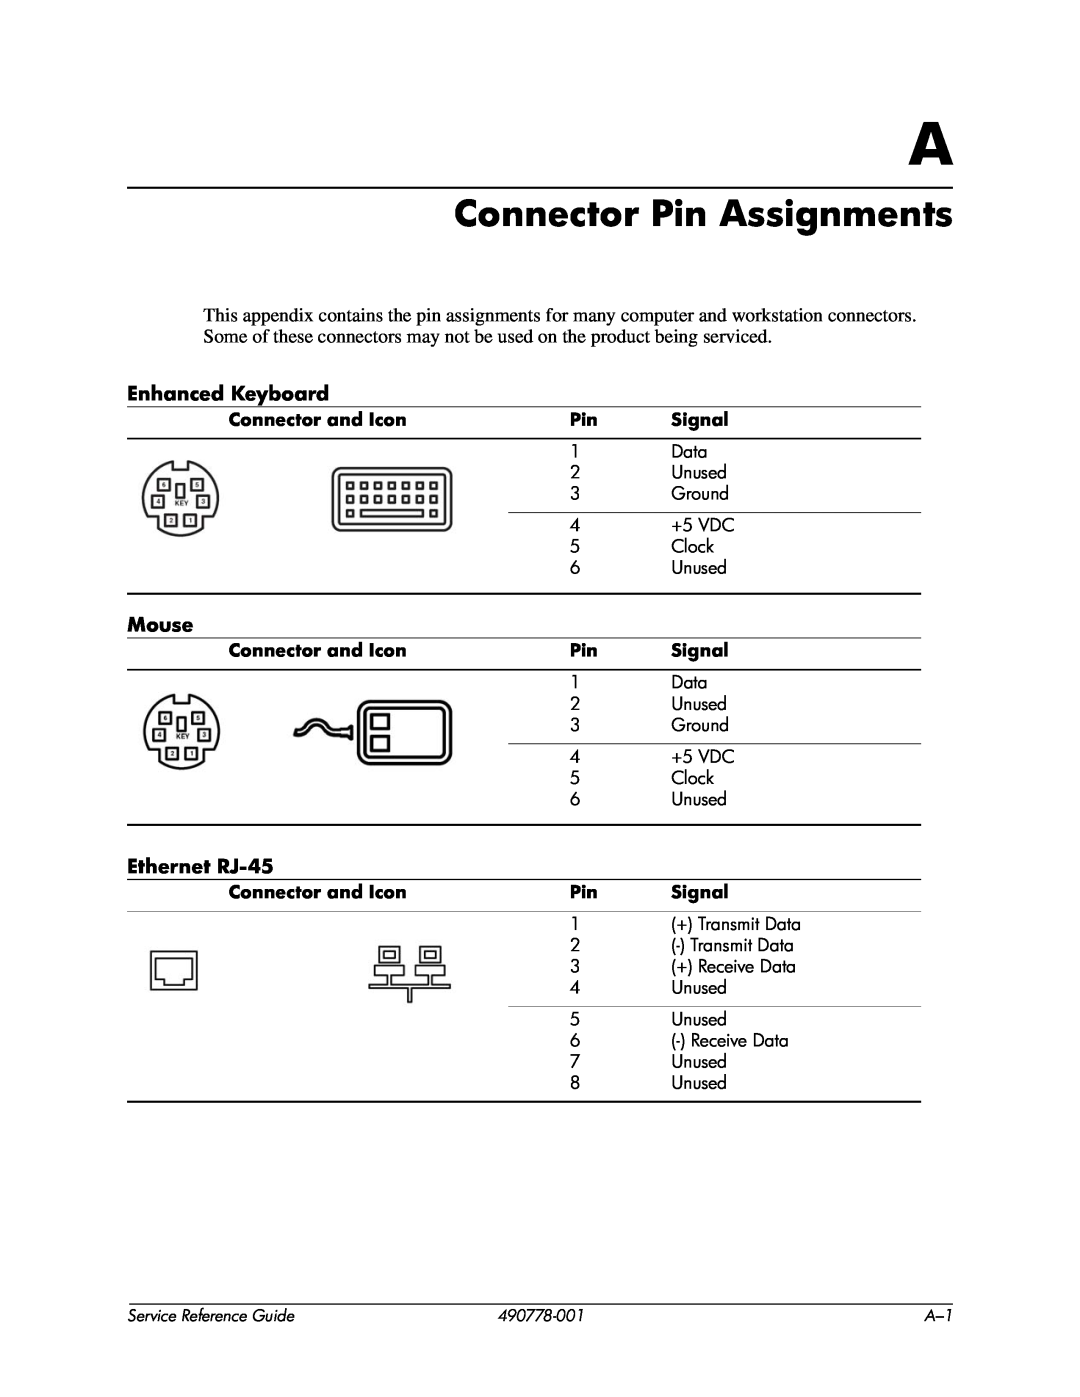 HP dx2310 manual Connector Pin Assignments, Enhanced Keyboard, Mouse, Ethernet RJ-45 